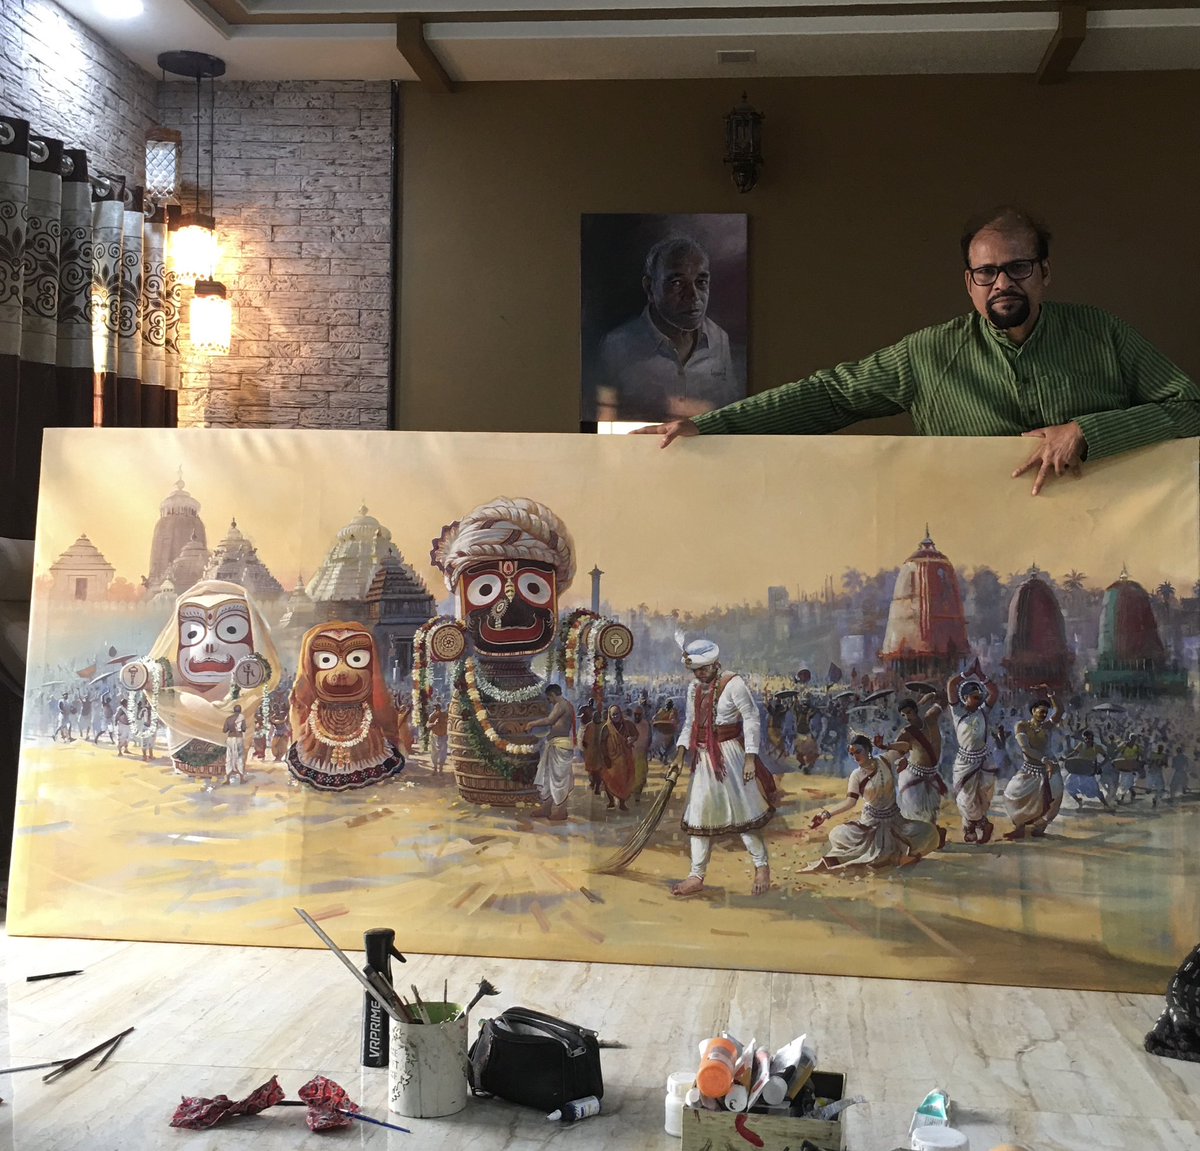 adding finishing touches to the biggest one in this genre .. tentatively titled ବଡ଼ଦାଣ୍ଡ .. BADA DAANDAW .. acrylic on canvas ..9x4 ft 
#PuriJagannadh #acrylicpainting #biswaalart #artcommission #rathajatra #Odisha